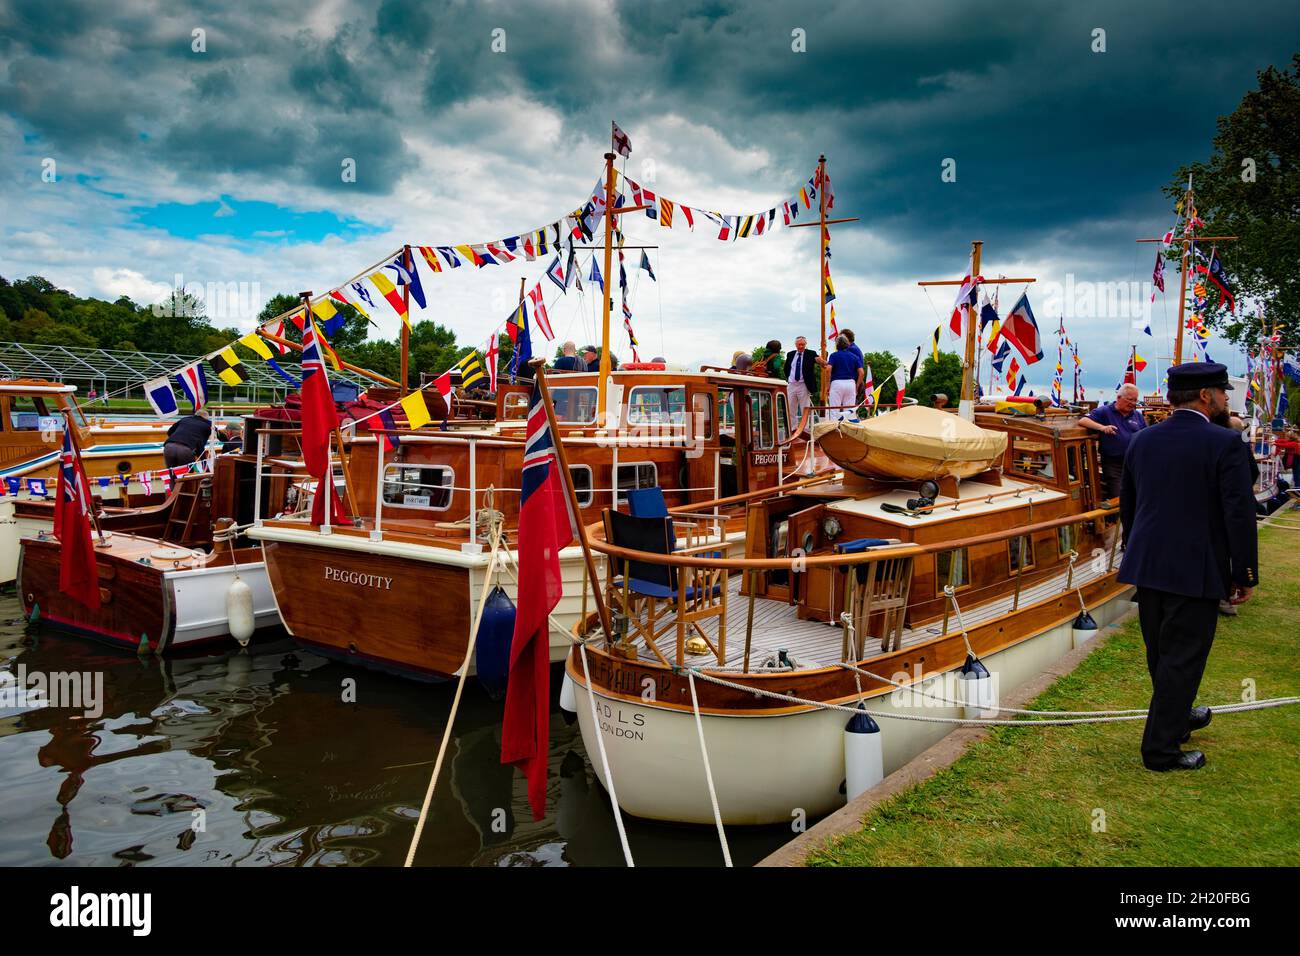 The Dunkirk Little Ships at the Thames Traditional Boat Festival at Henley Upon Thames England. Stock Photo